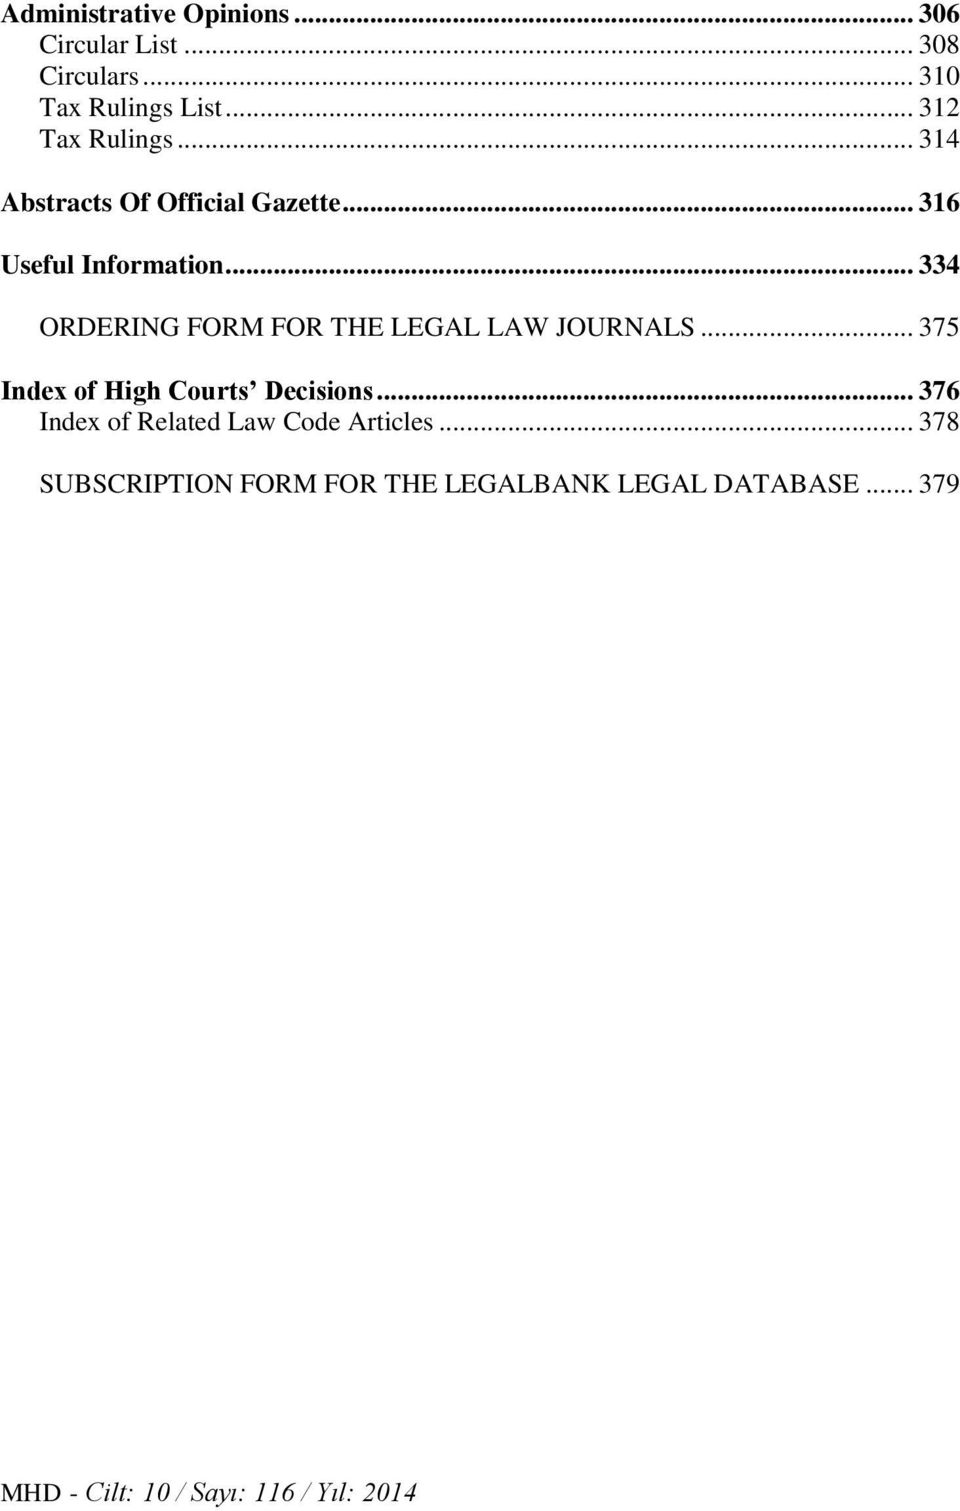 .. 334 ORDERING FORM FOR THE LEGAL LAW JOURNALS... 375 Index of High Courts Decisions.